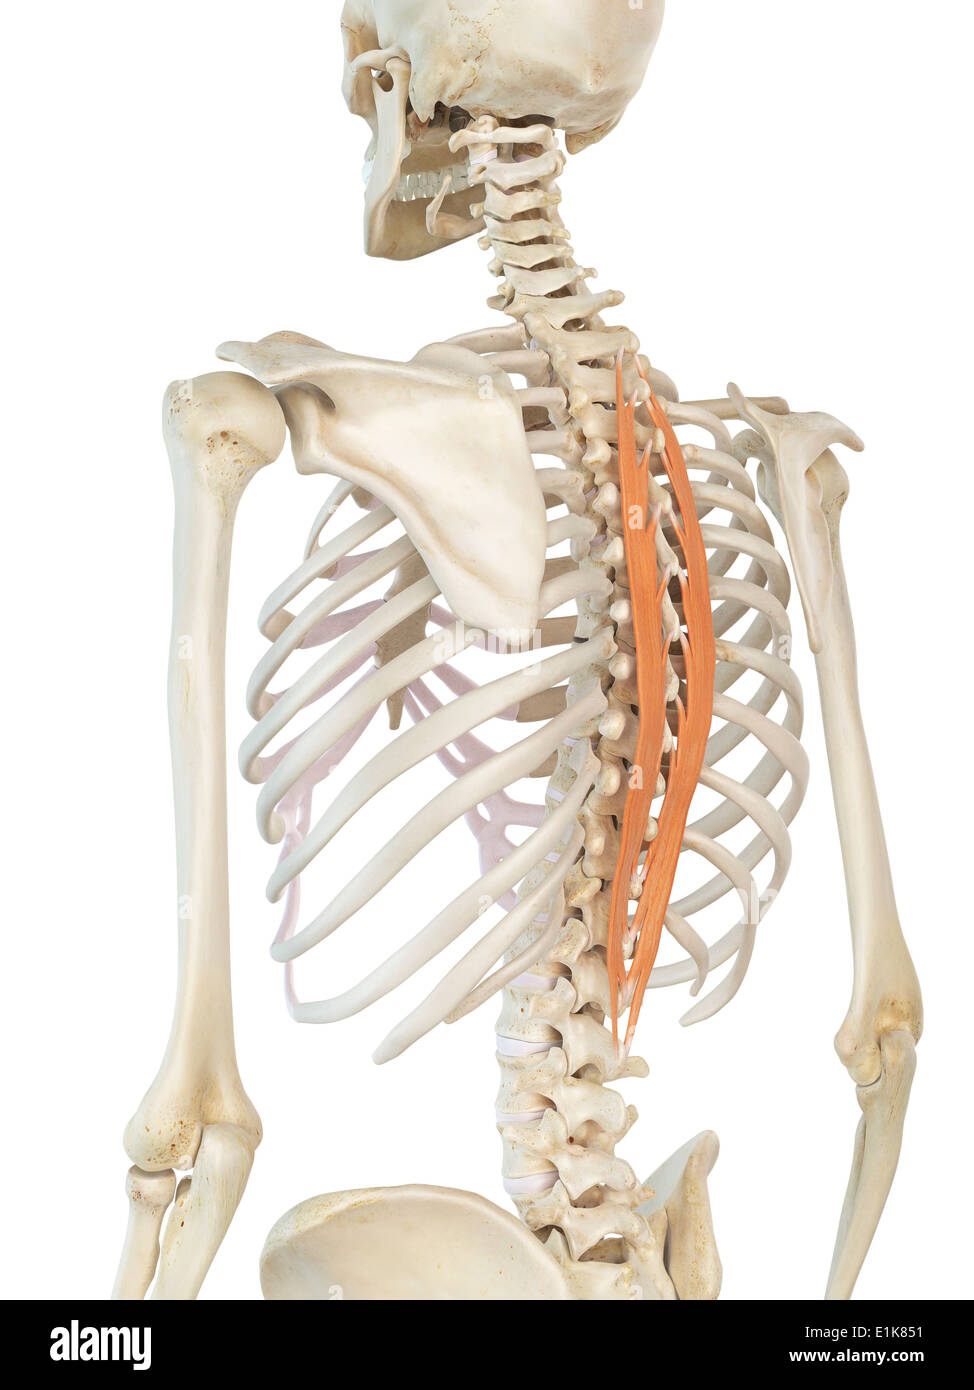 Human spinalis thoracis muscle computer artwork. Stock Photo